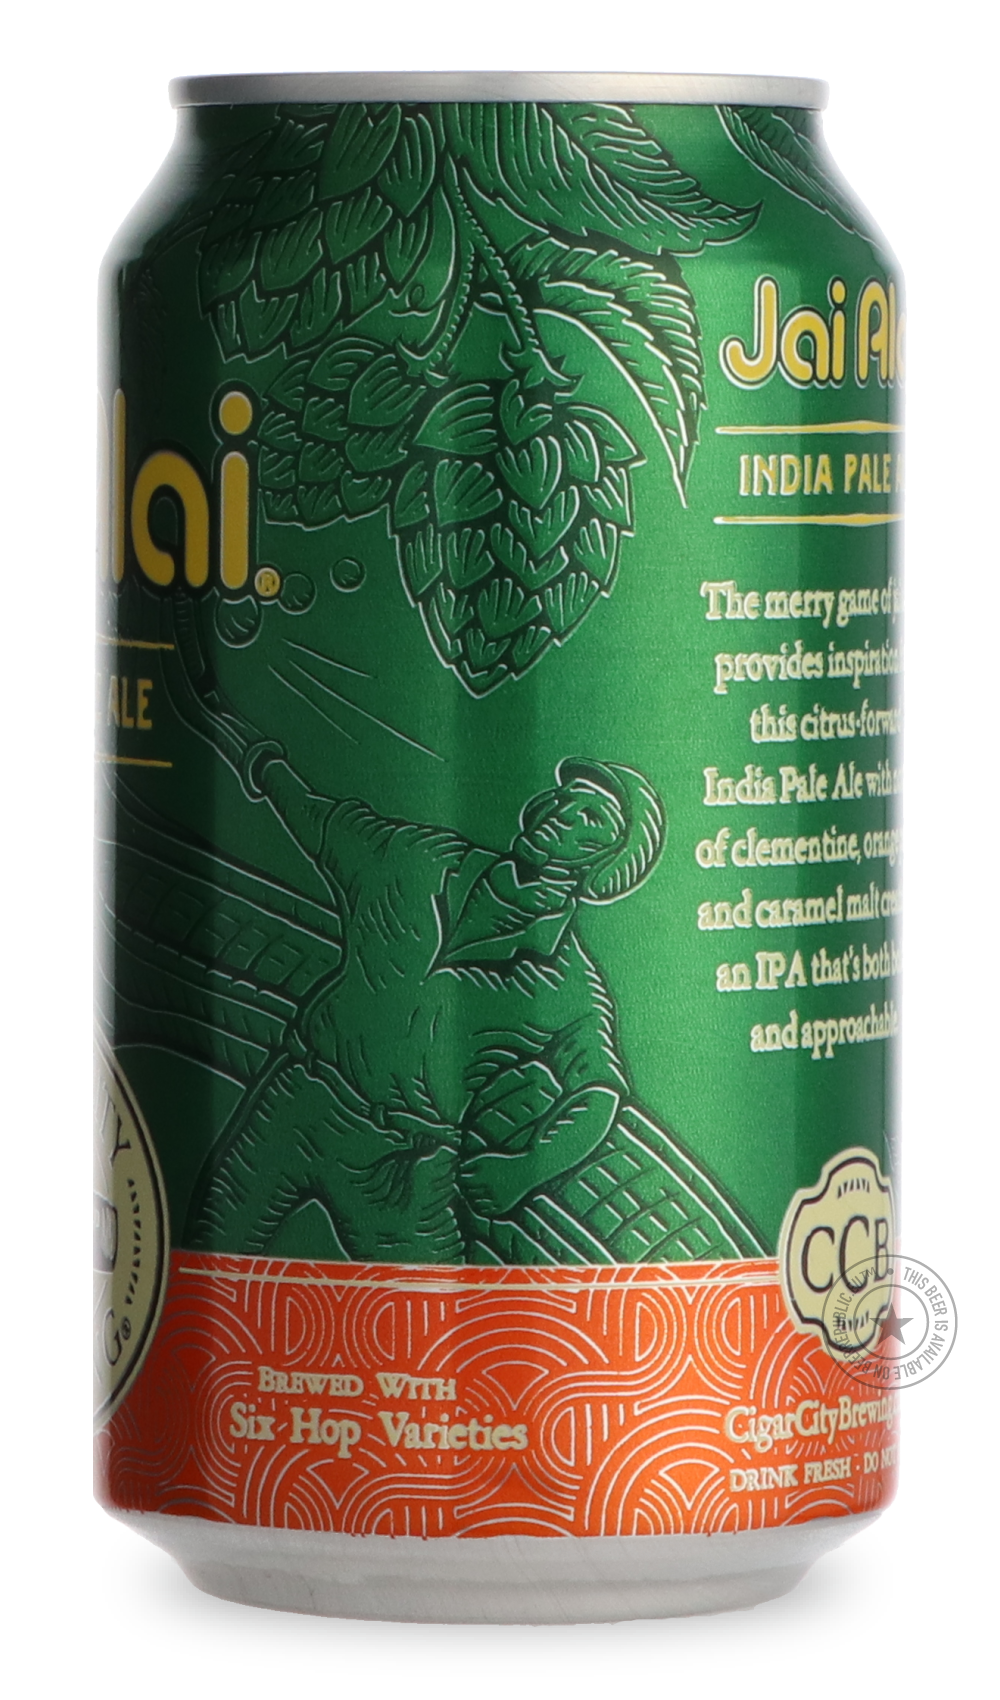 -Cigar City- Jai Alai-IPA- Only @ Beer Republic - The best online beer store for American & Canadian craft beer - Buy beer online from the USA and Canada - Bier online kopen - Amerikaans bier kopen - Craft beer store - Craft beer kopen - Amerikanisch bier kaufen - Bier online kaufen - Acheter biere online - IPA - Stout - Porter - New England IPA - Hazy IPA - Imperial Stout - Barrel Aged - Barrel Aged Imperial Stout - Brown - Dark beer - Blond - Blonde - Pilsner - Lager - Wheat - Weizen - Amber - Barley Wine